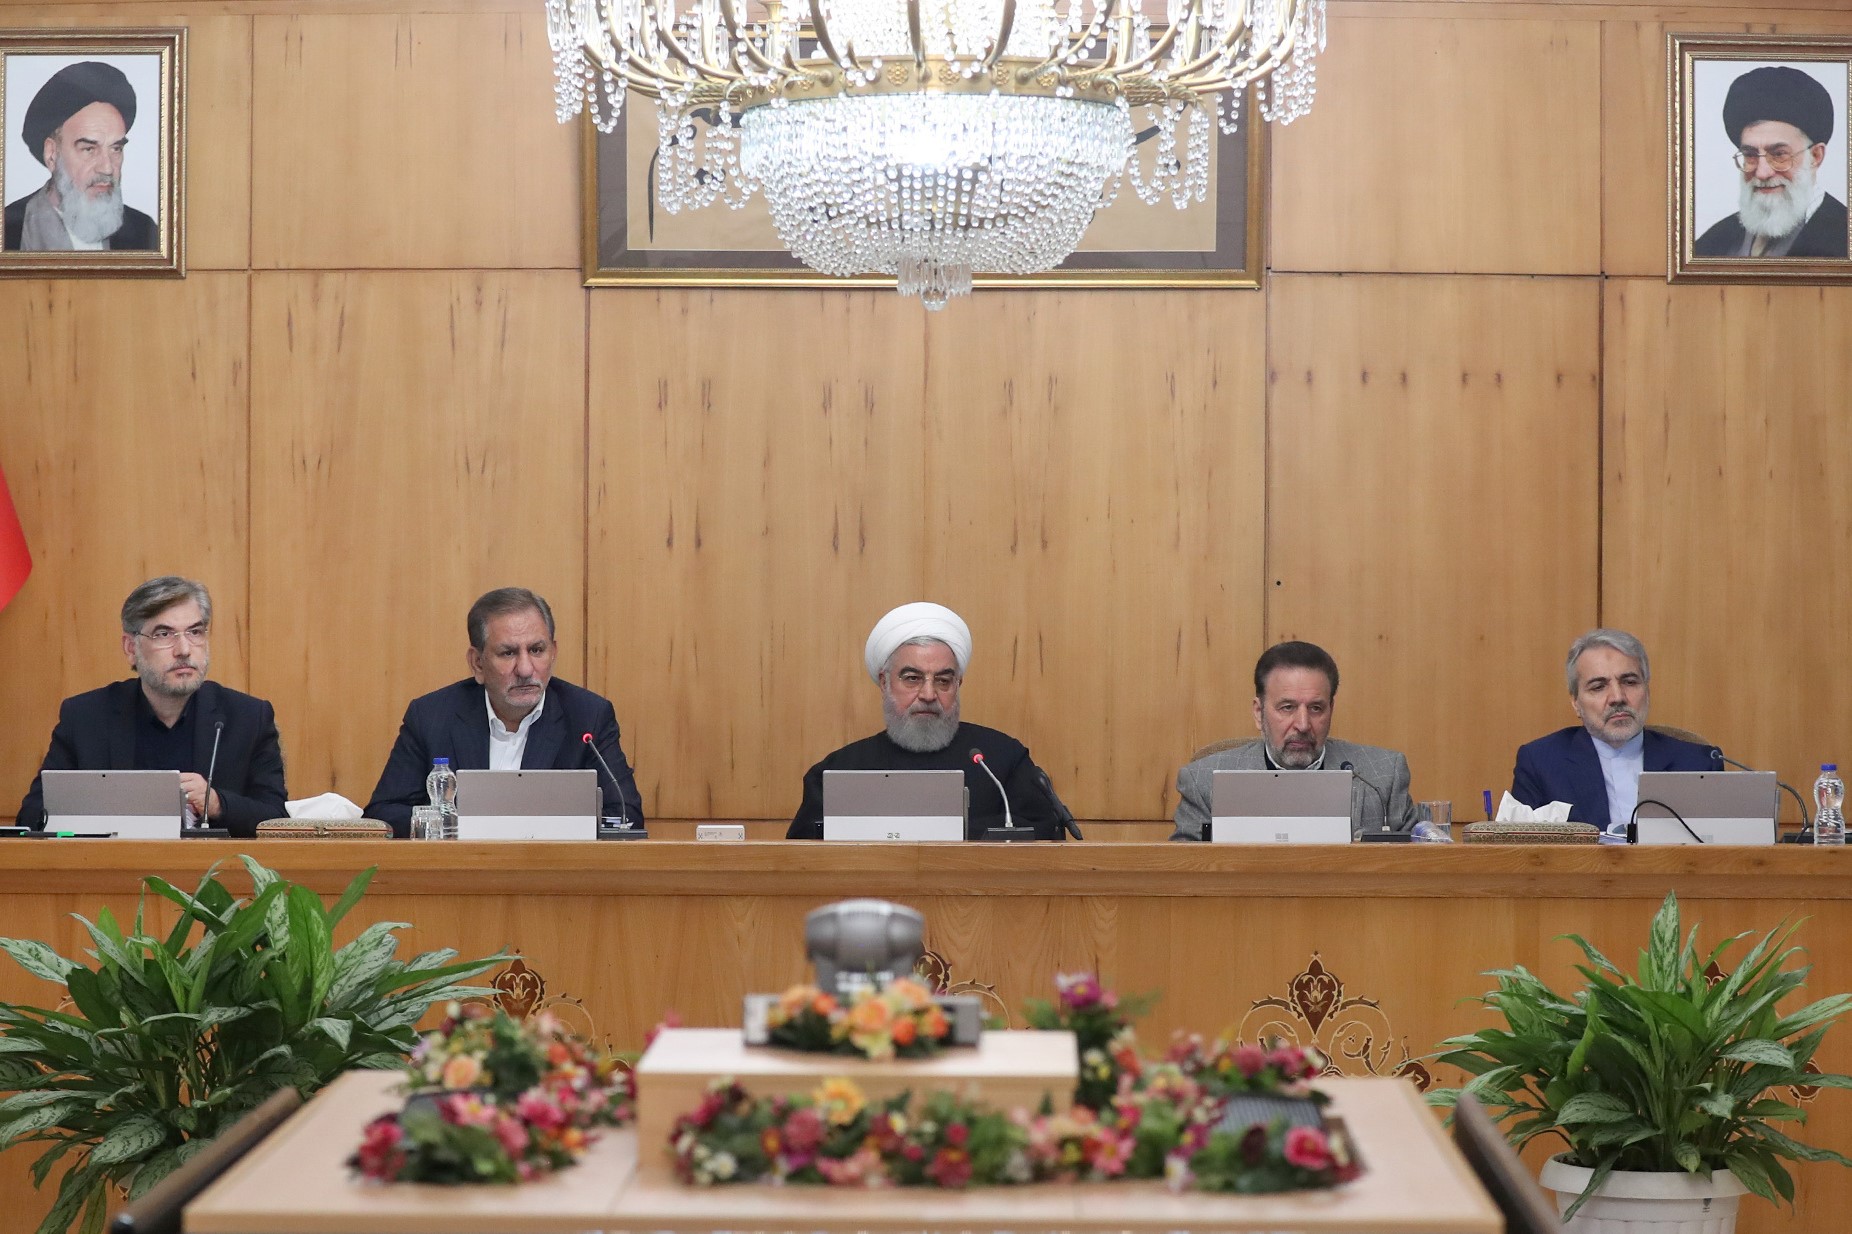 Iranian President Hassan Rouhani speaks during the cabinet meeting in Tehran, Iran, November 20, 2019